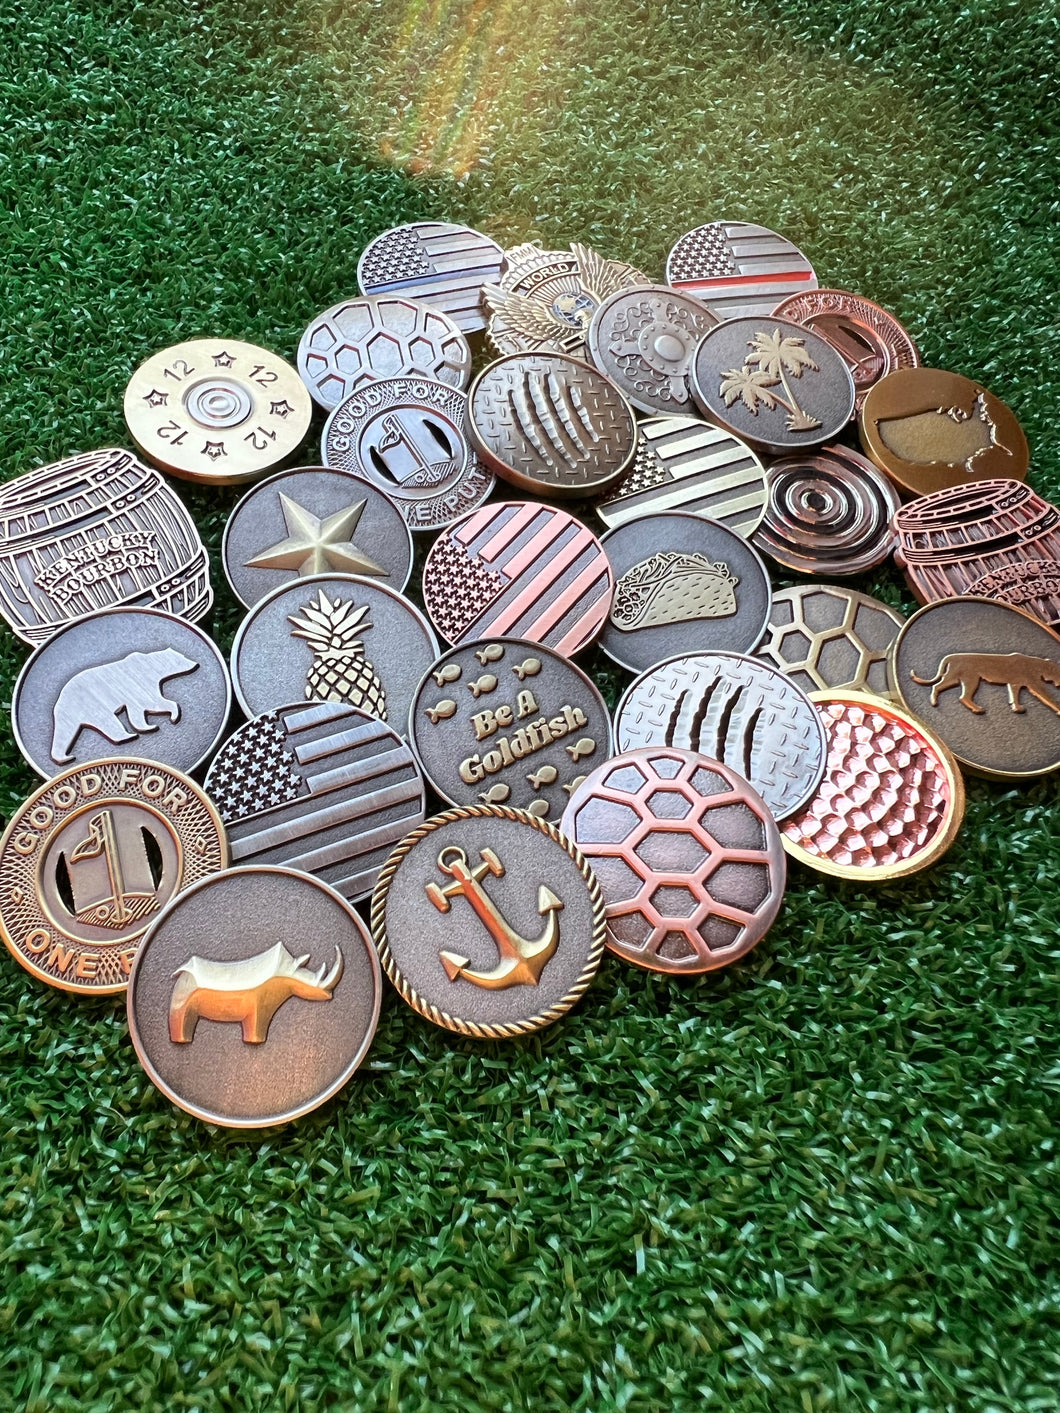 Mix and Match - Any 3 Golf Ball Markers